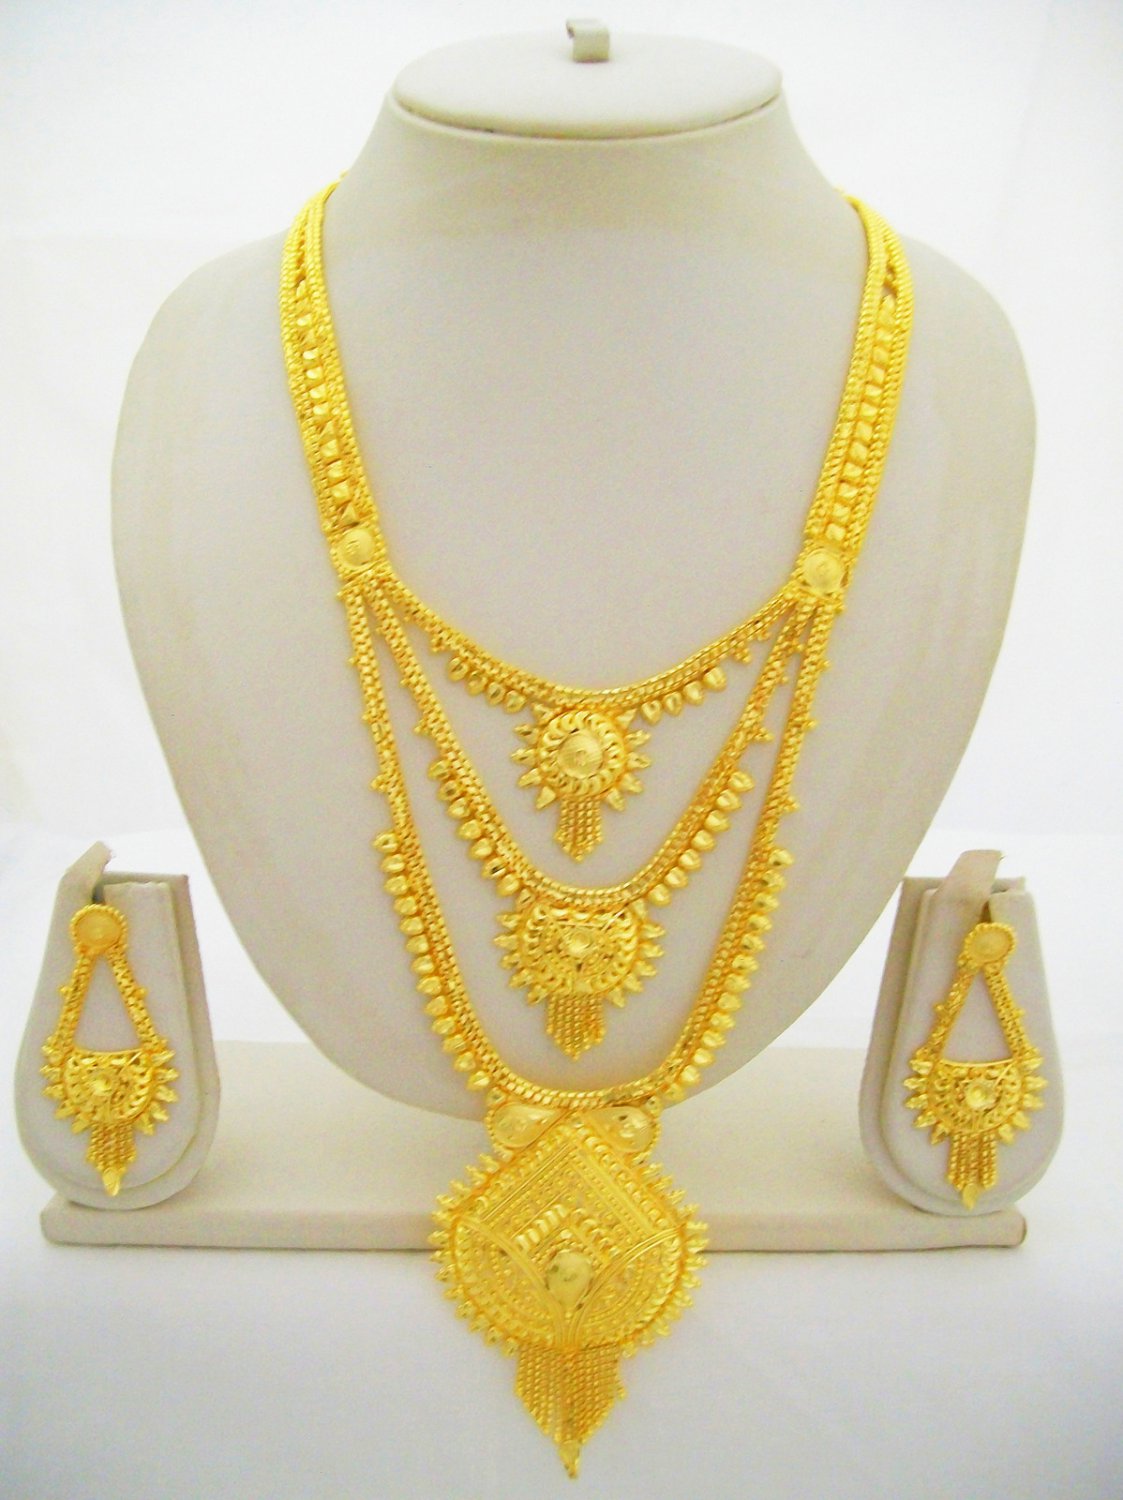 22k Gold Plated Rani Haar 3 Layered Long Necklace Jewelry Set